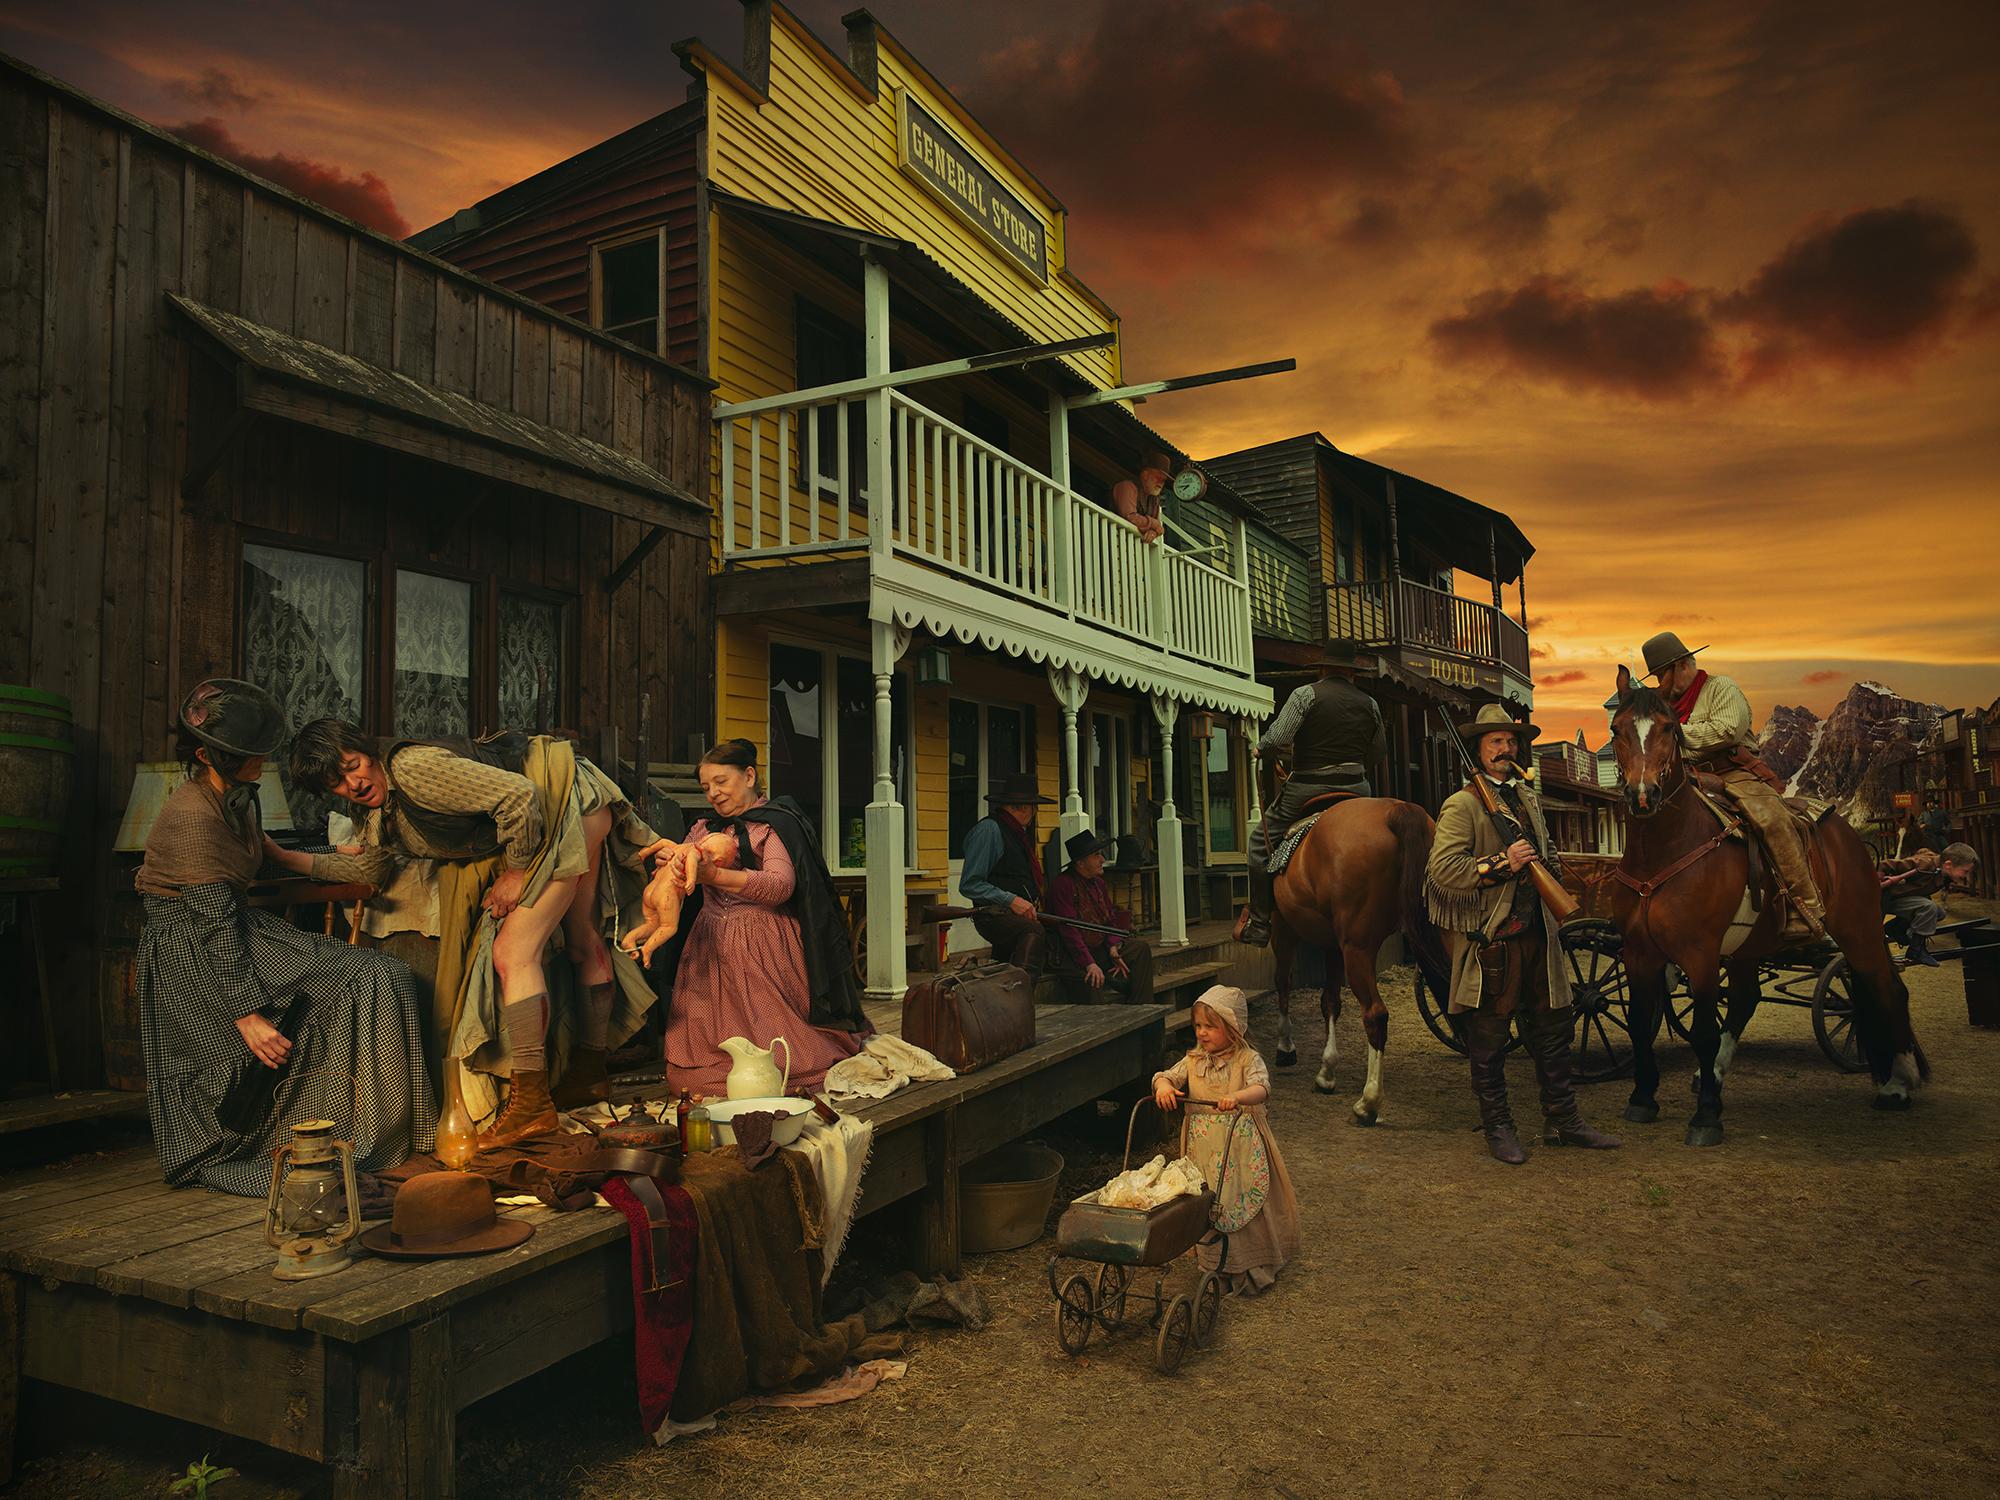 Natalie Lennard Color Photograph - Born of Calamity- Staged Photograph of Birth Scene of Wild West + Calamity Jane